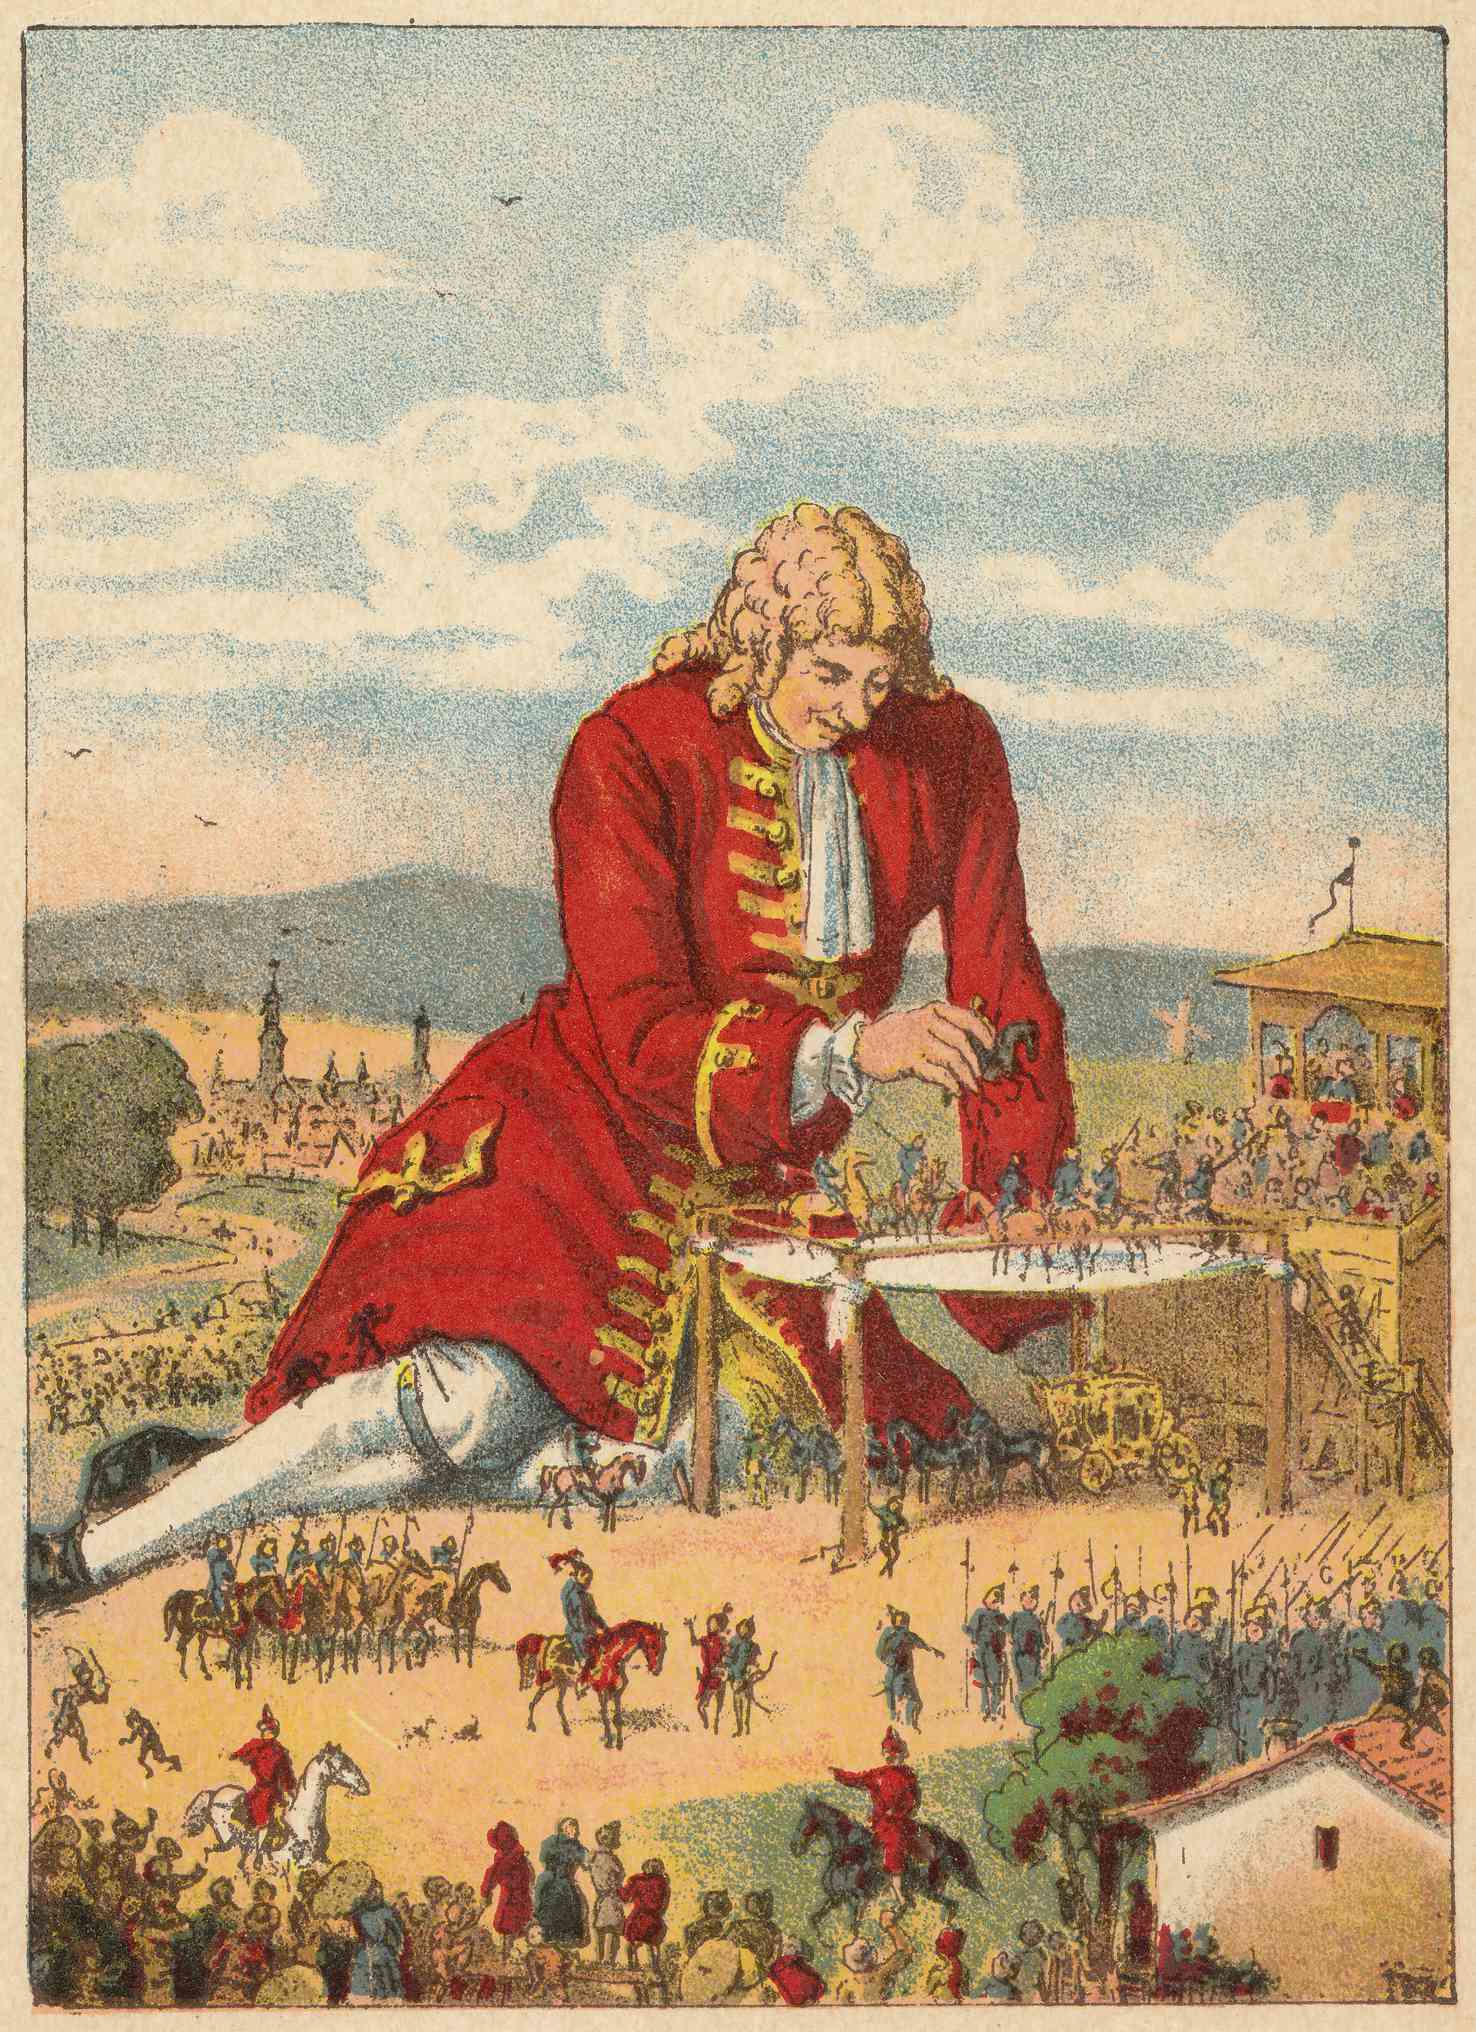 Discussion Questions: Gulliver’s Travels by Jonathan Swift